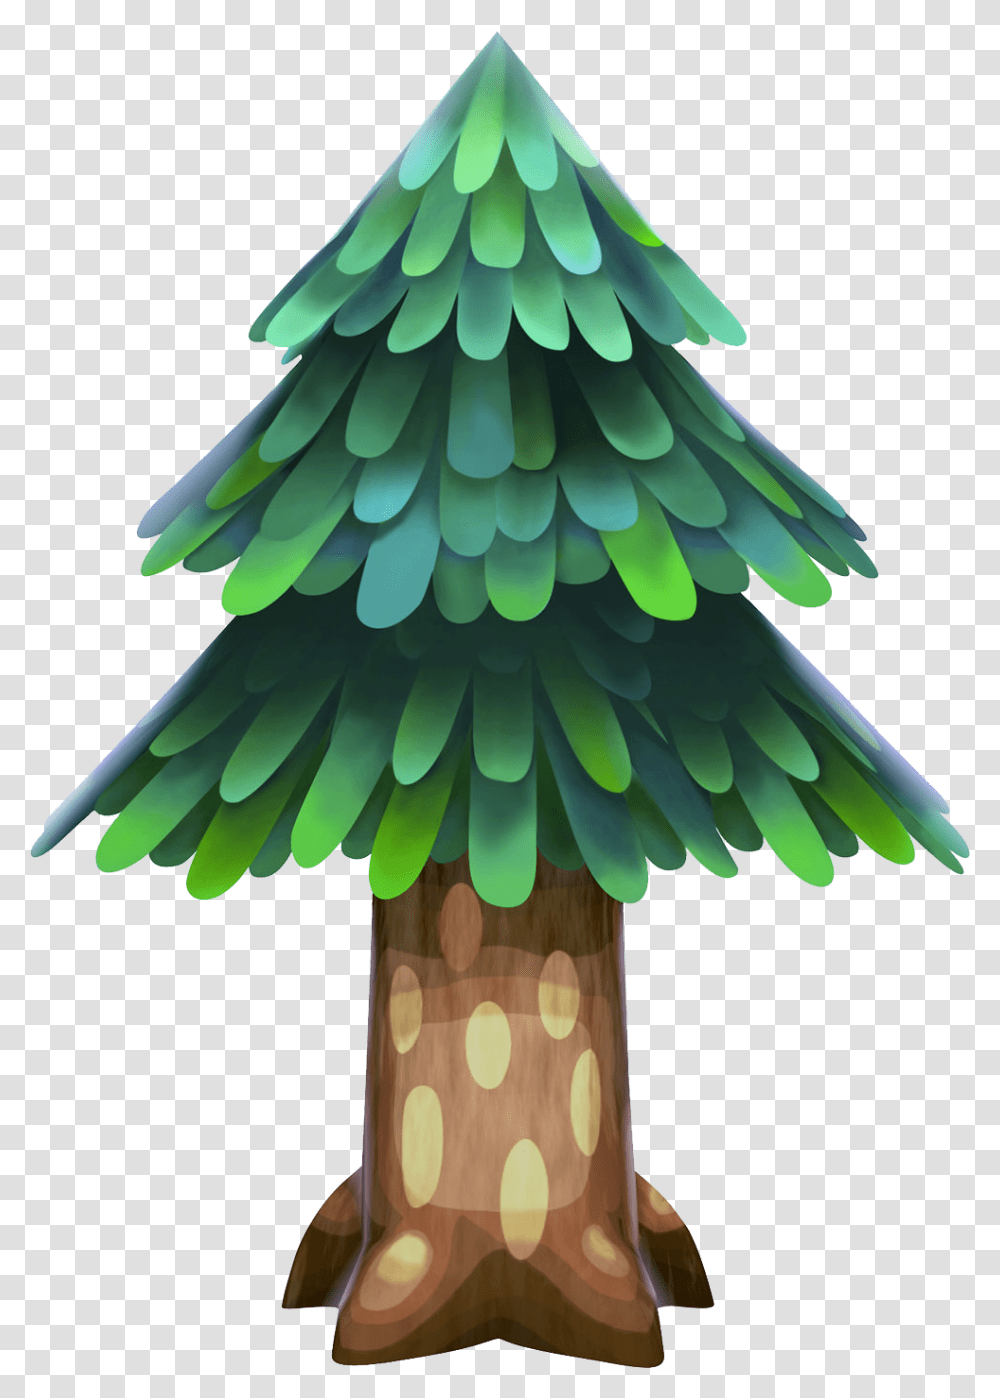 Animal Crossing Pocket Camp Tree, Ornament, Plant, Pattern, Christmas Tree Transparent Png